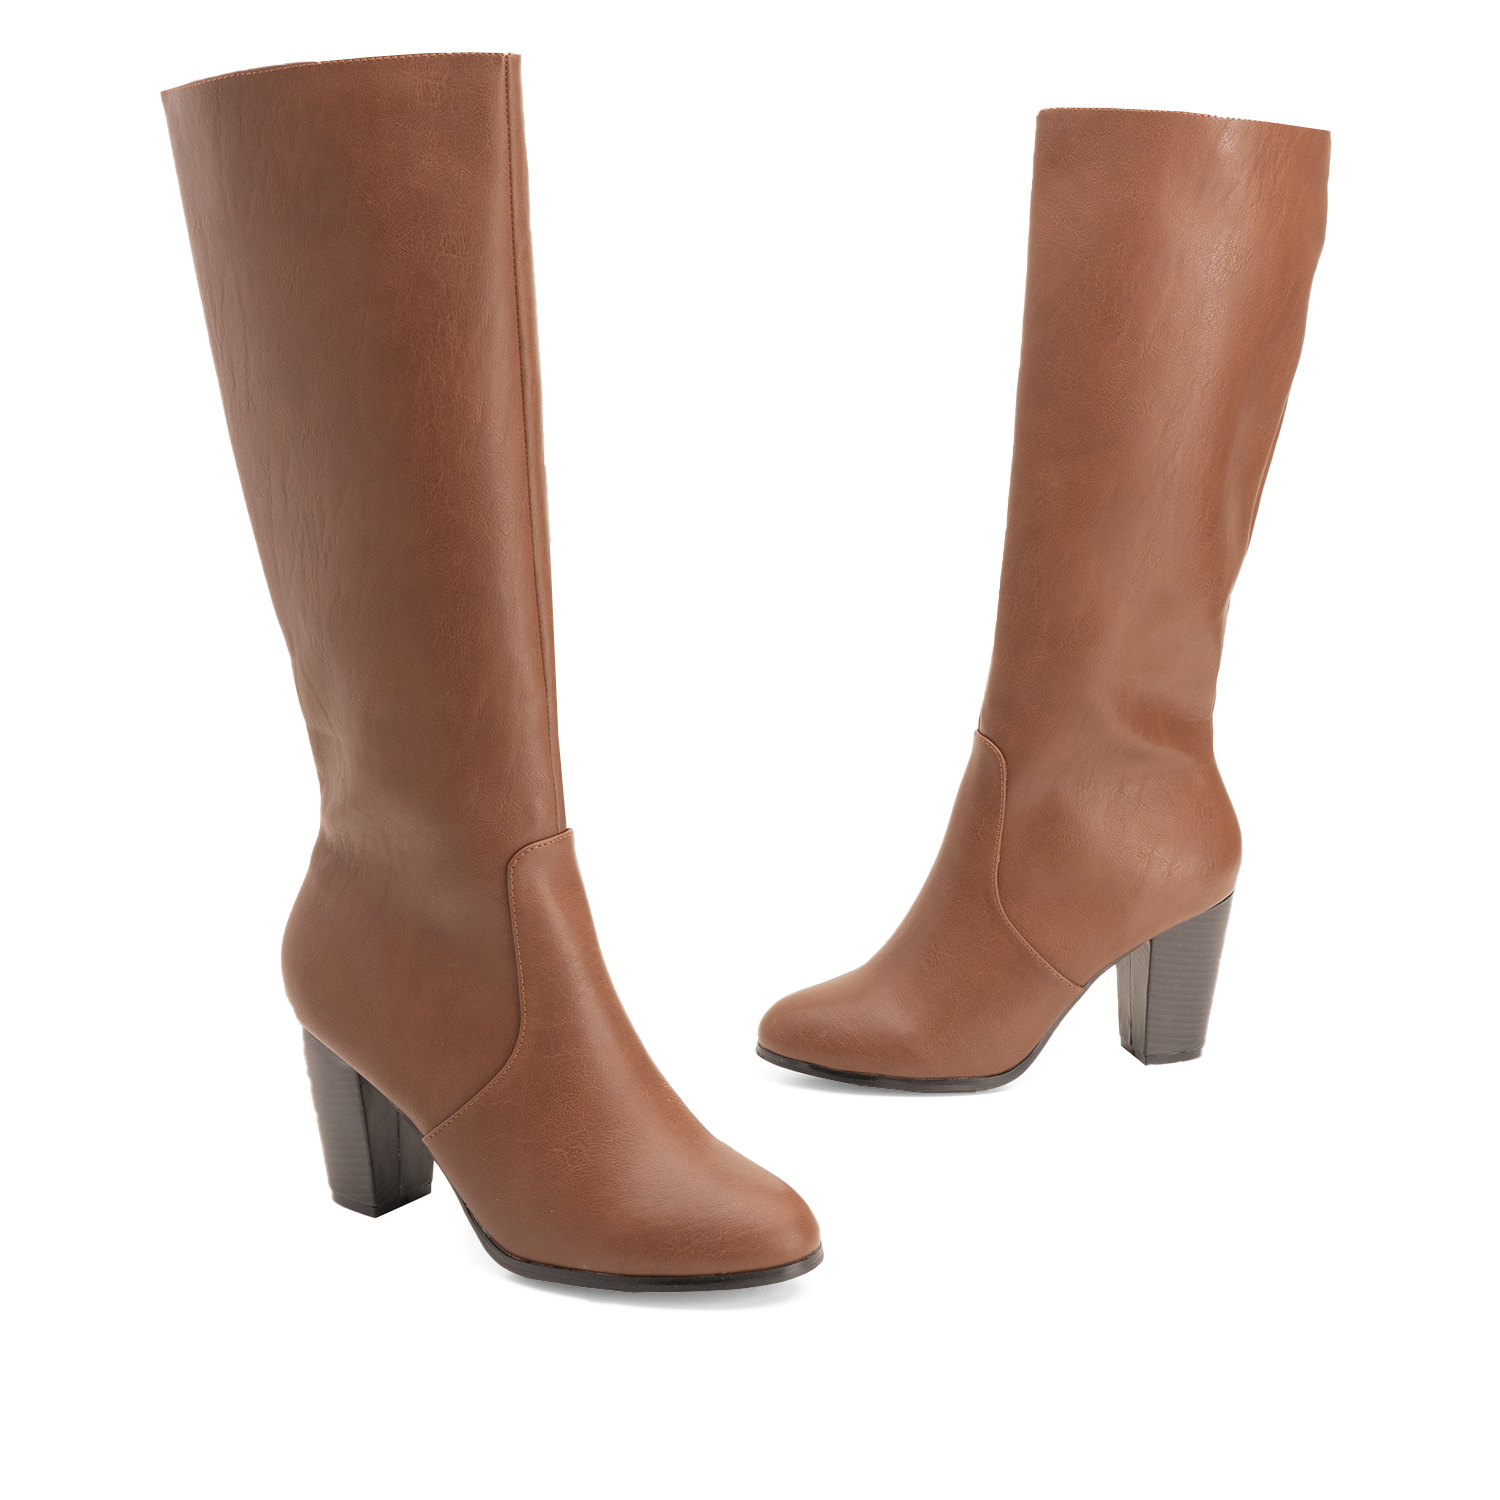 Heled mid-calf boots in brown faux leather 